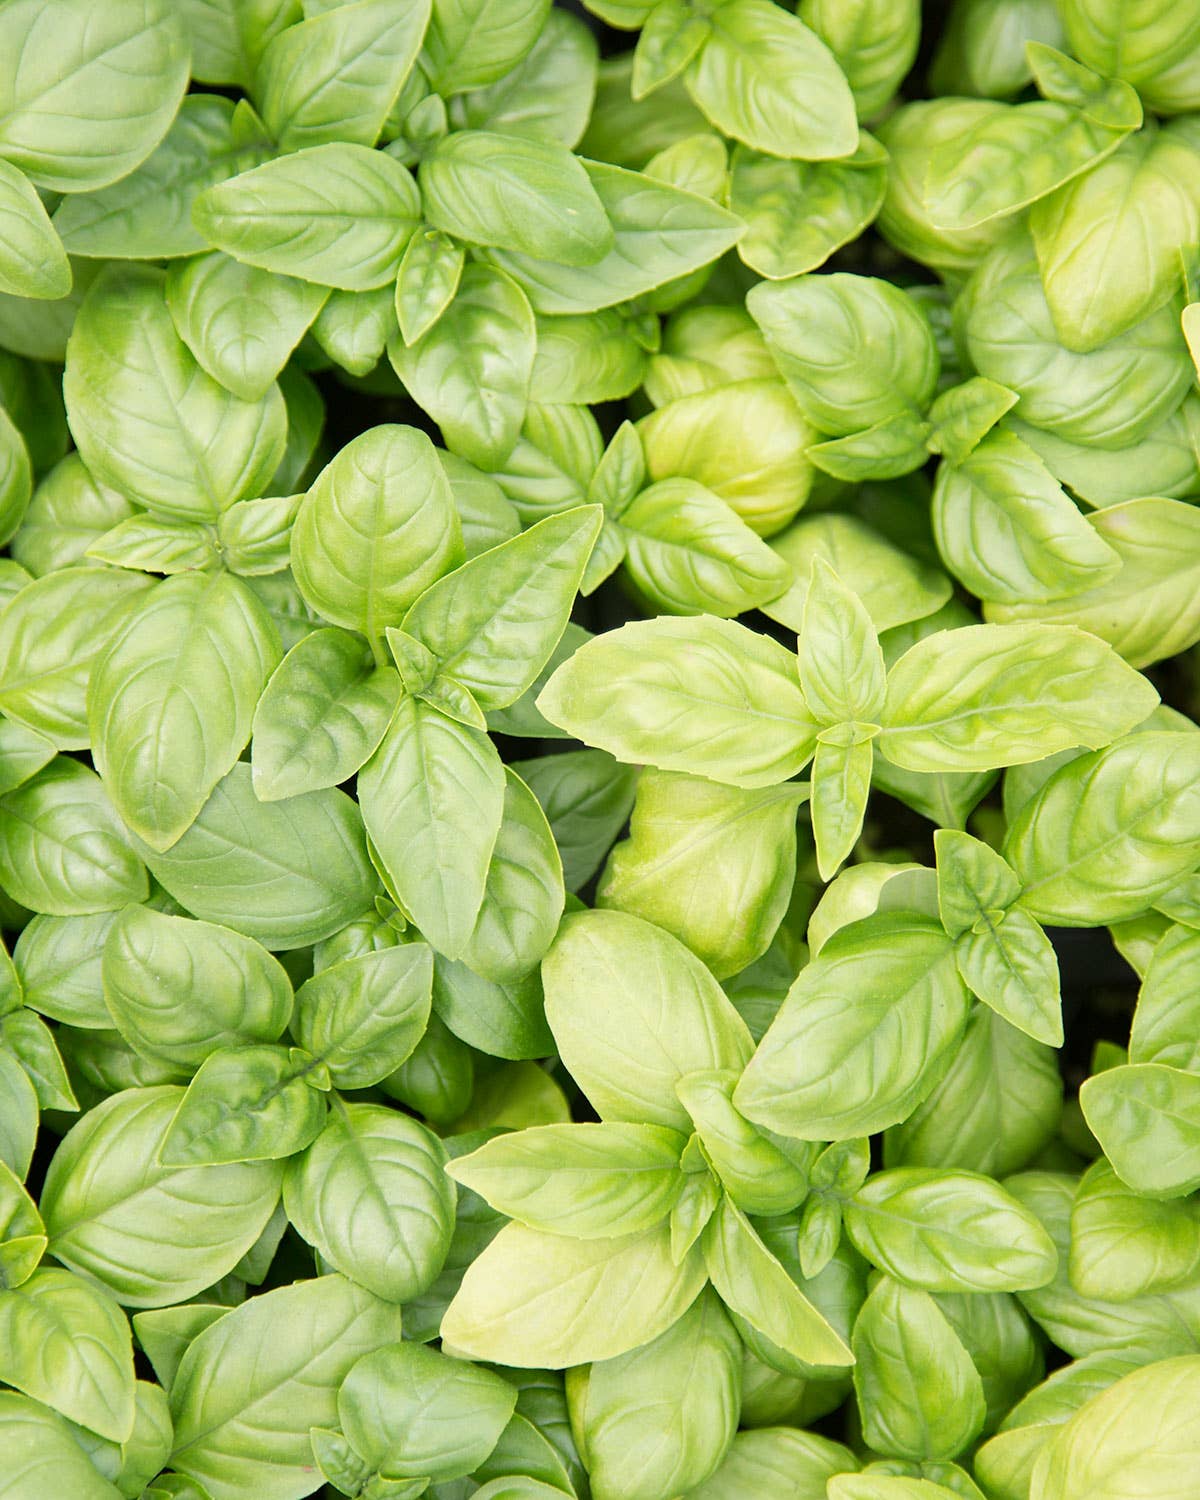 Building A Garden: Why Growing Herbs is Easy